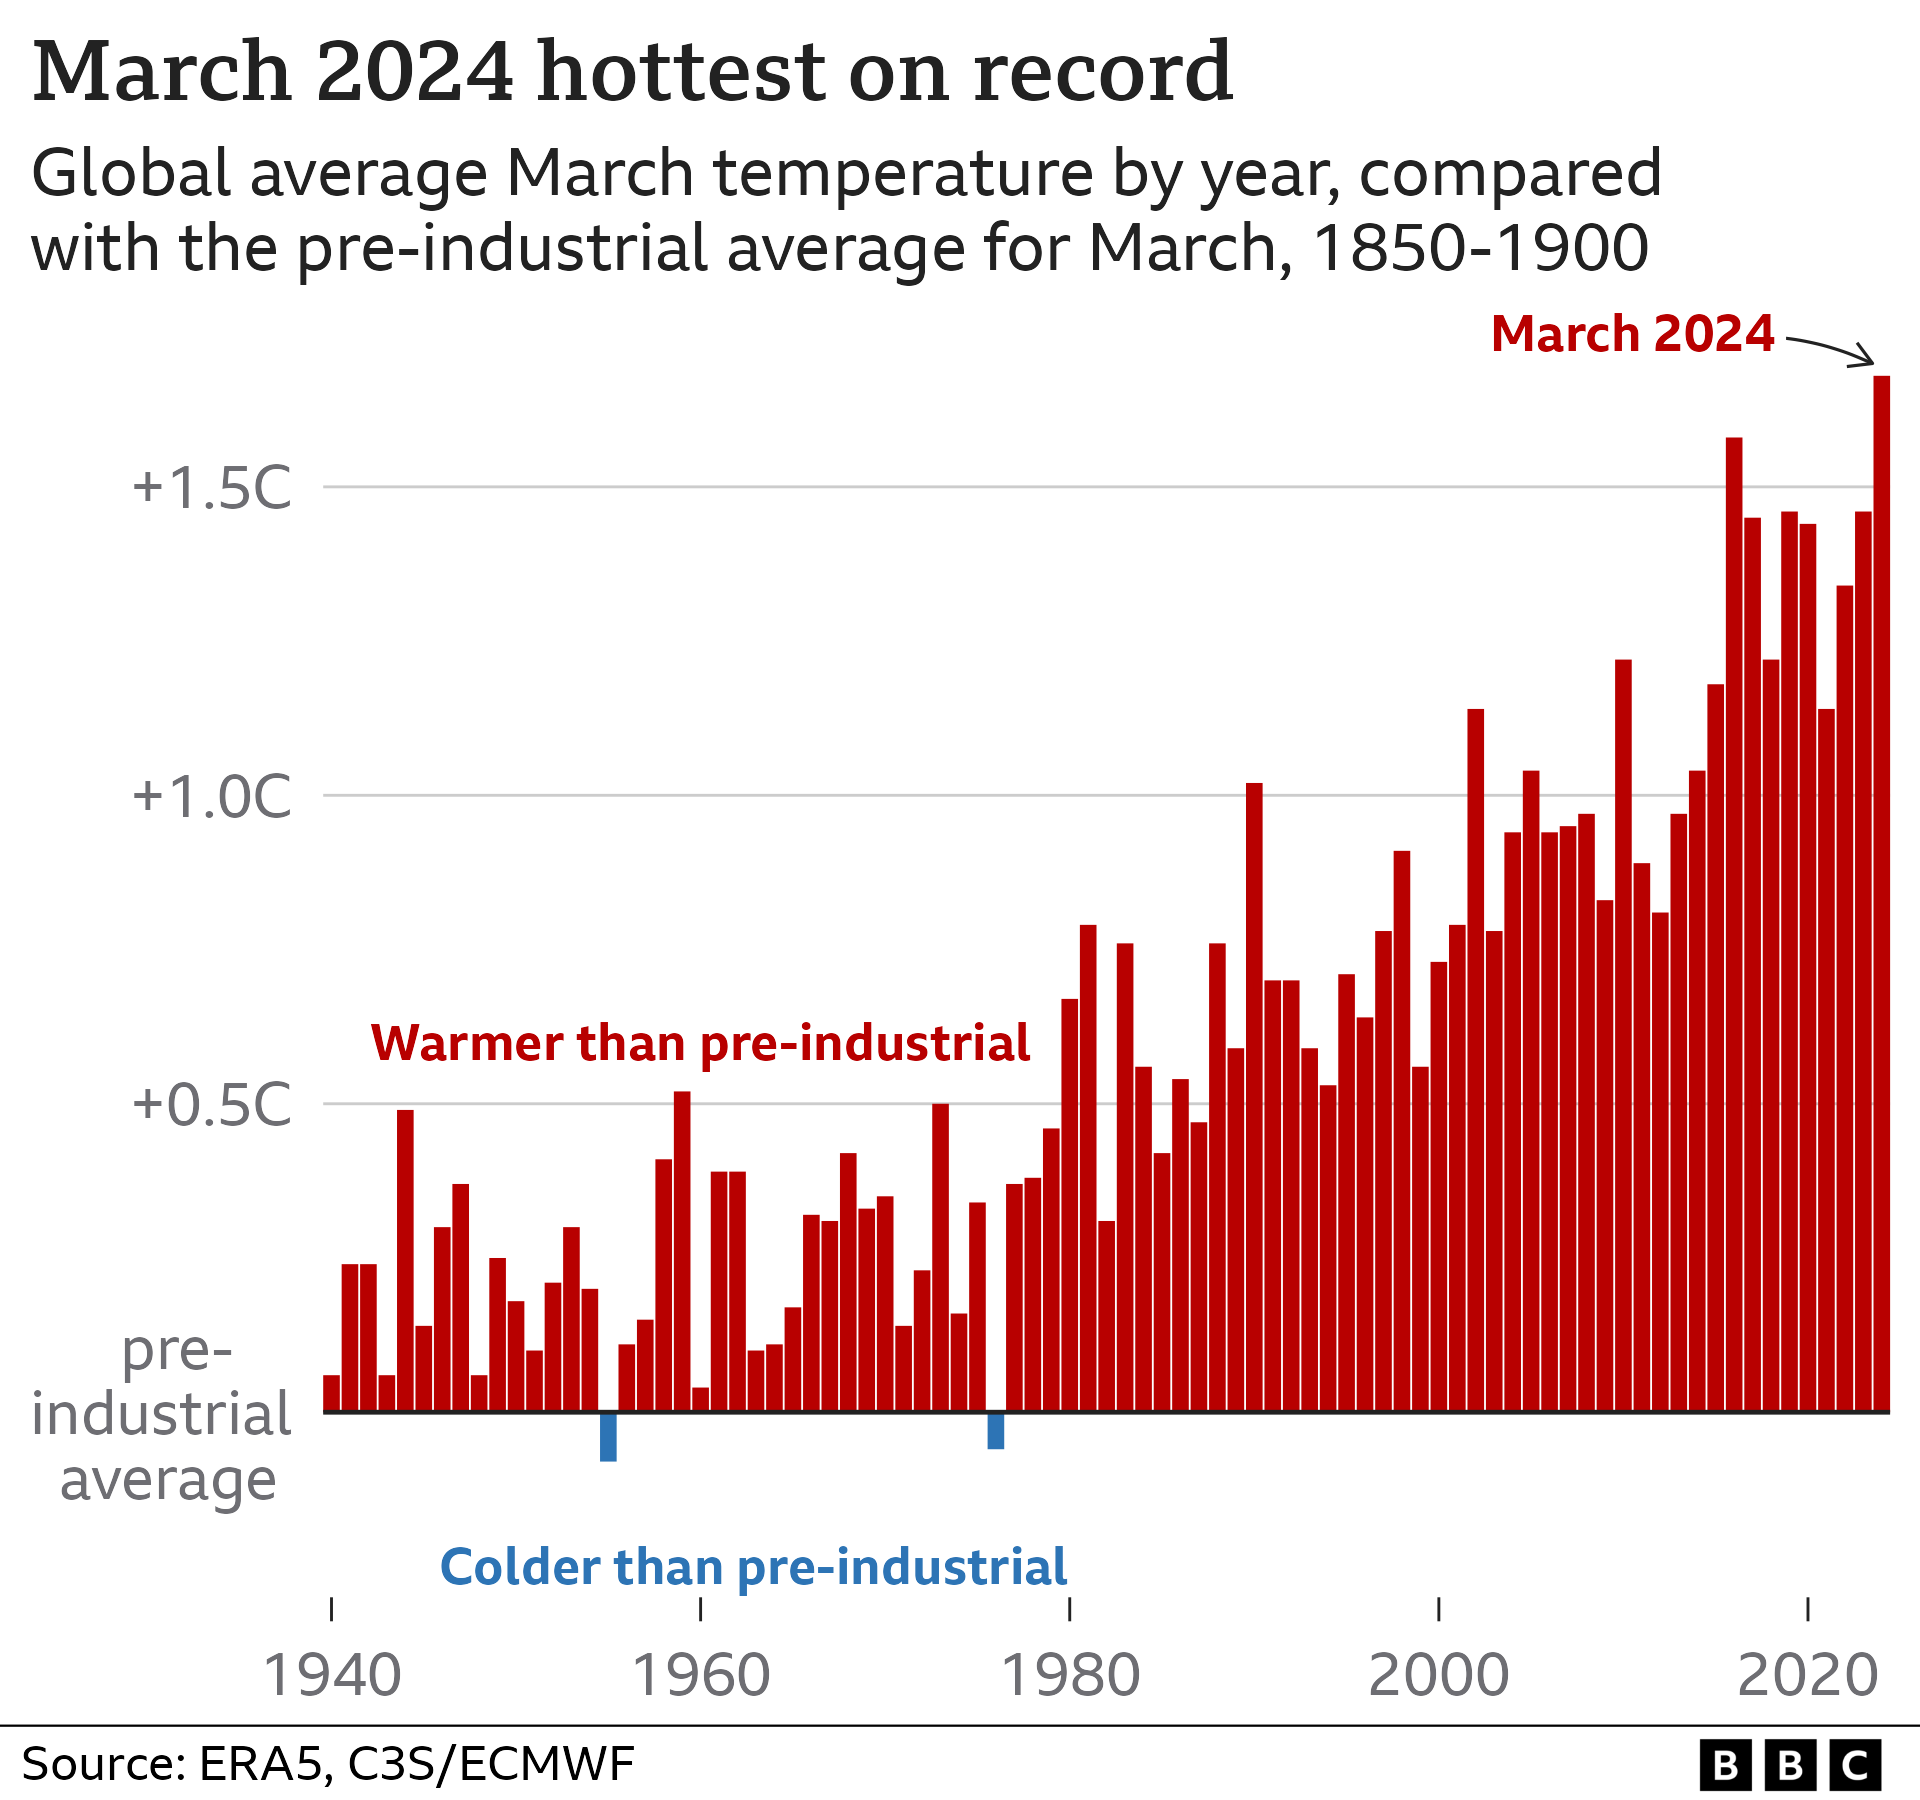 Bar chart showing March temperatures, 1940-2024. March 2024 was the hottest March on record at 1.68C above the pre-industrial average (1850-1900), and there has been an increasing trend over time.